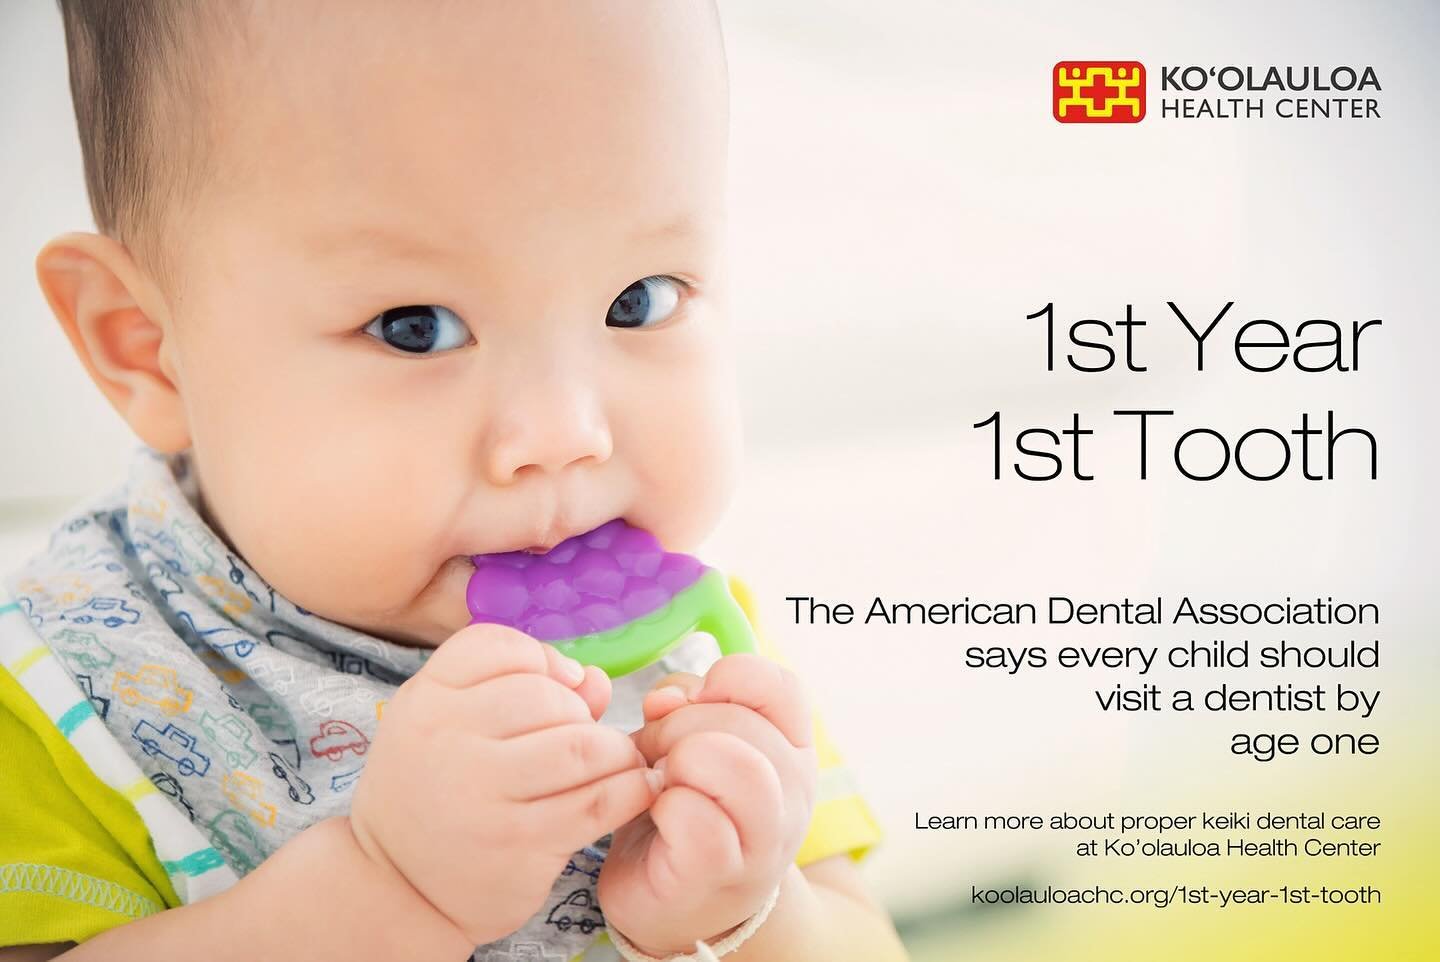 Aloha &lsquo;Ohana,

Did you know that the American Dental Association says that every child should visit a dentist by age 1?

The sooner children begin getting regular dental checkups, the healthier their mouths will stay throughout their lives. Ear